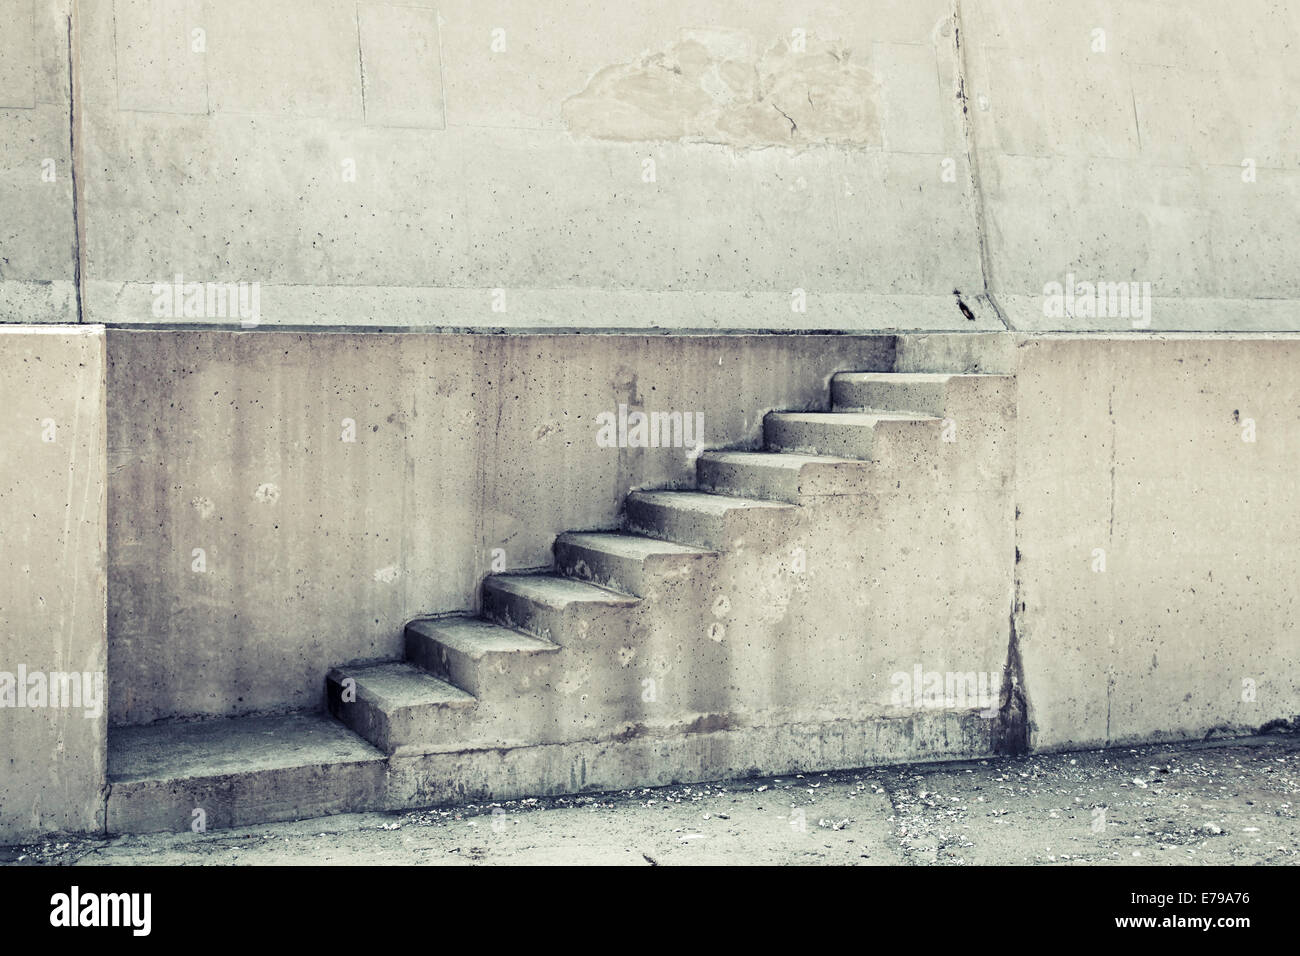 Concrete interior with stairway on the wall, vintage toned photo Stock Photo